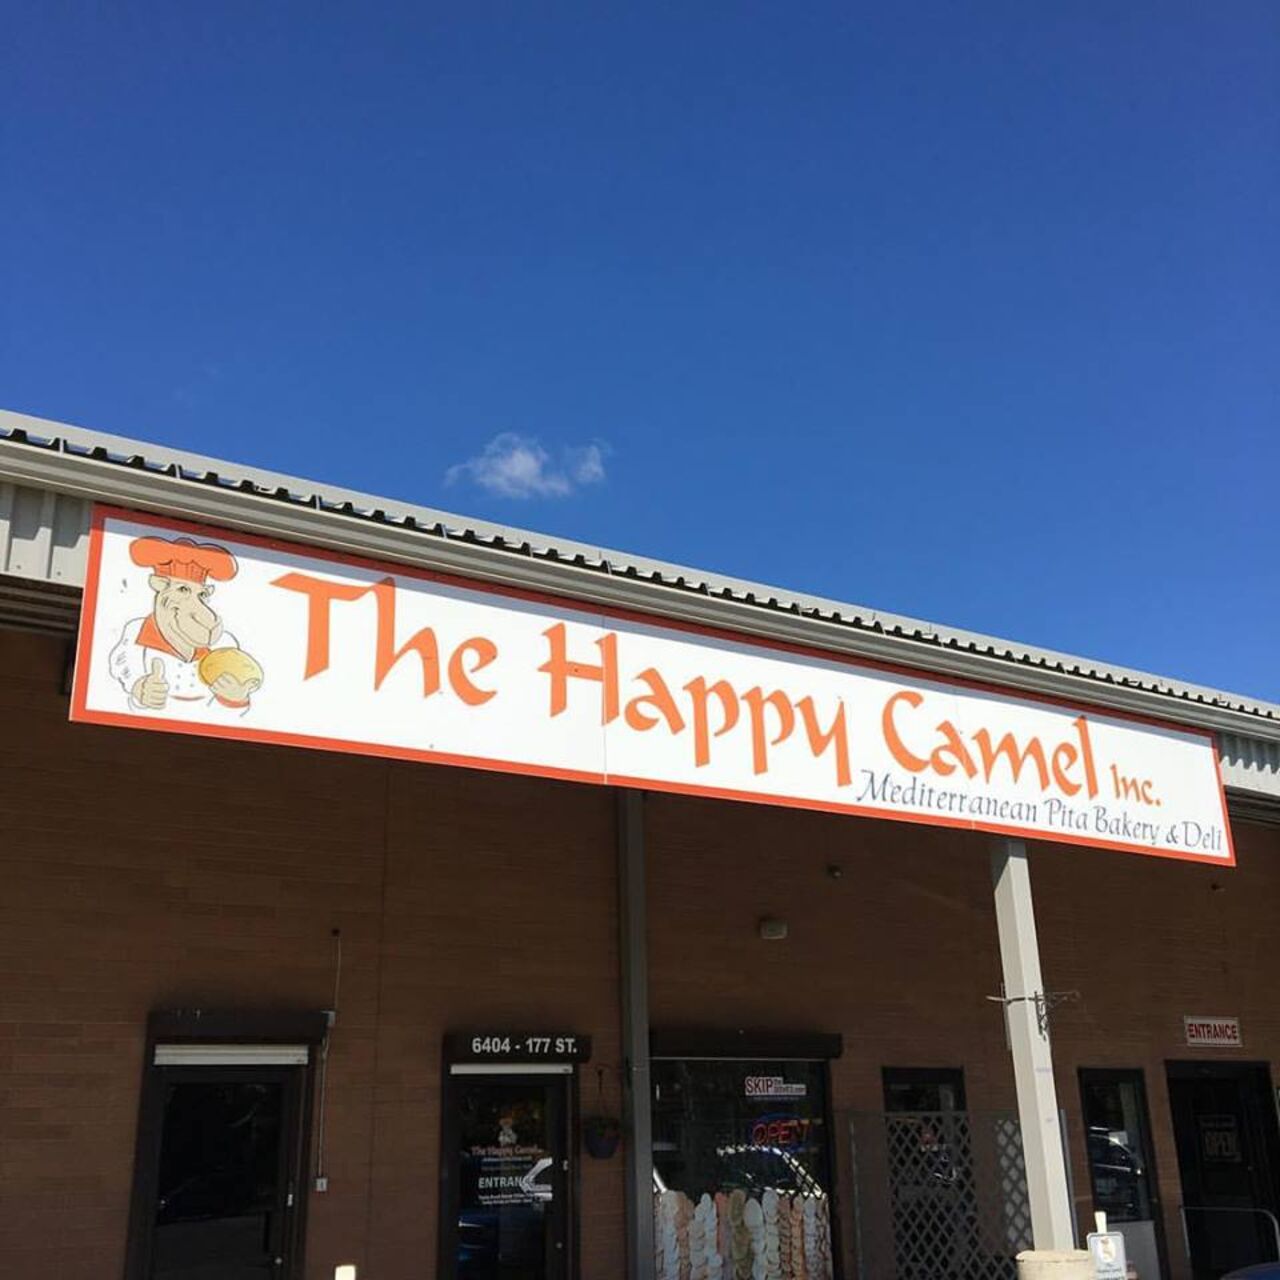 A photo of The Happy Camel